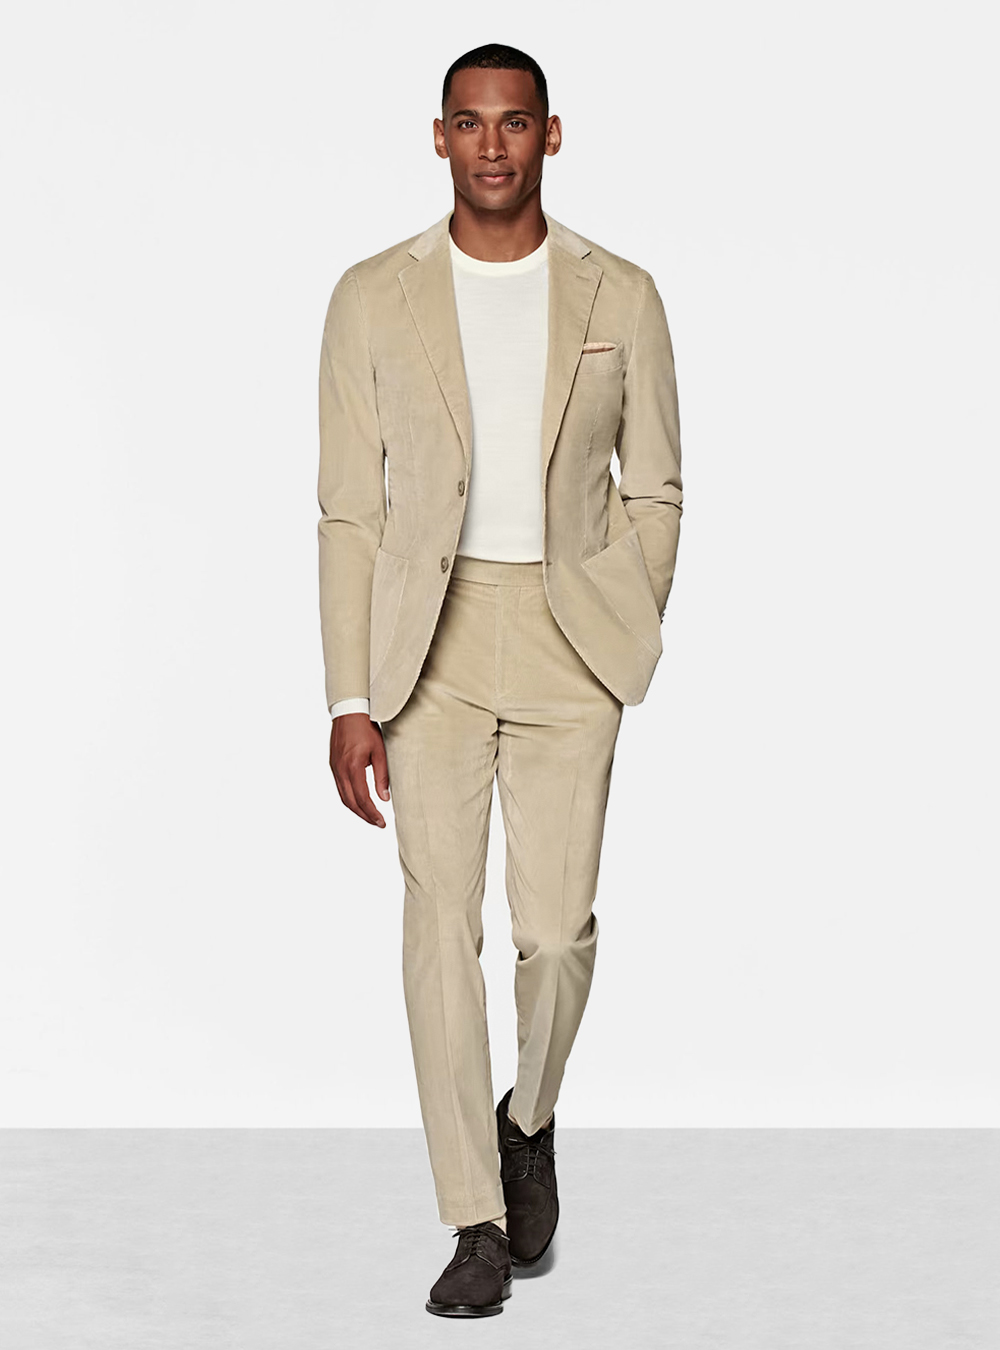 tan suit, white t-shirt, and brown suede derby shoes